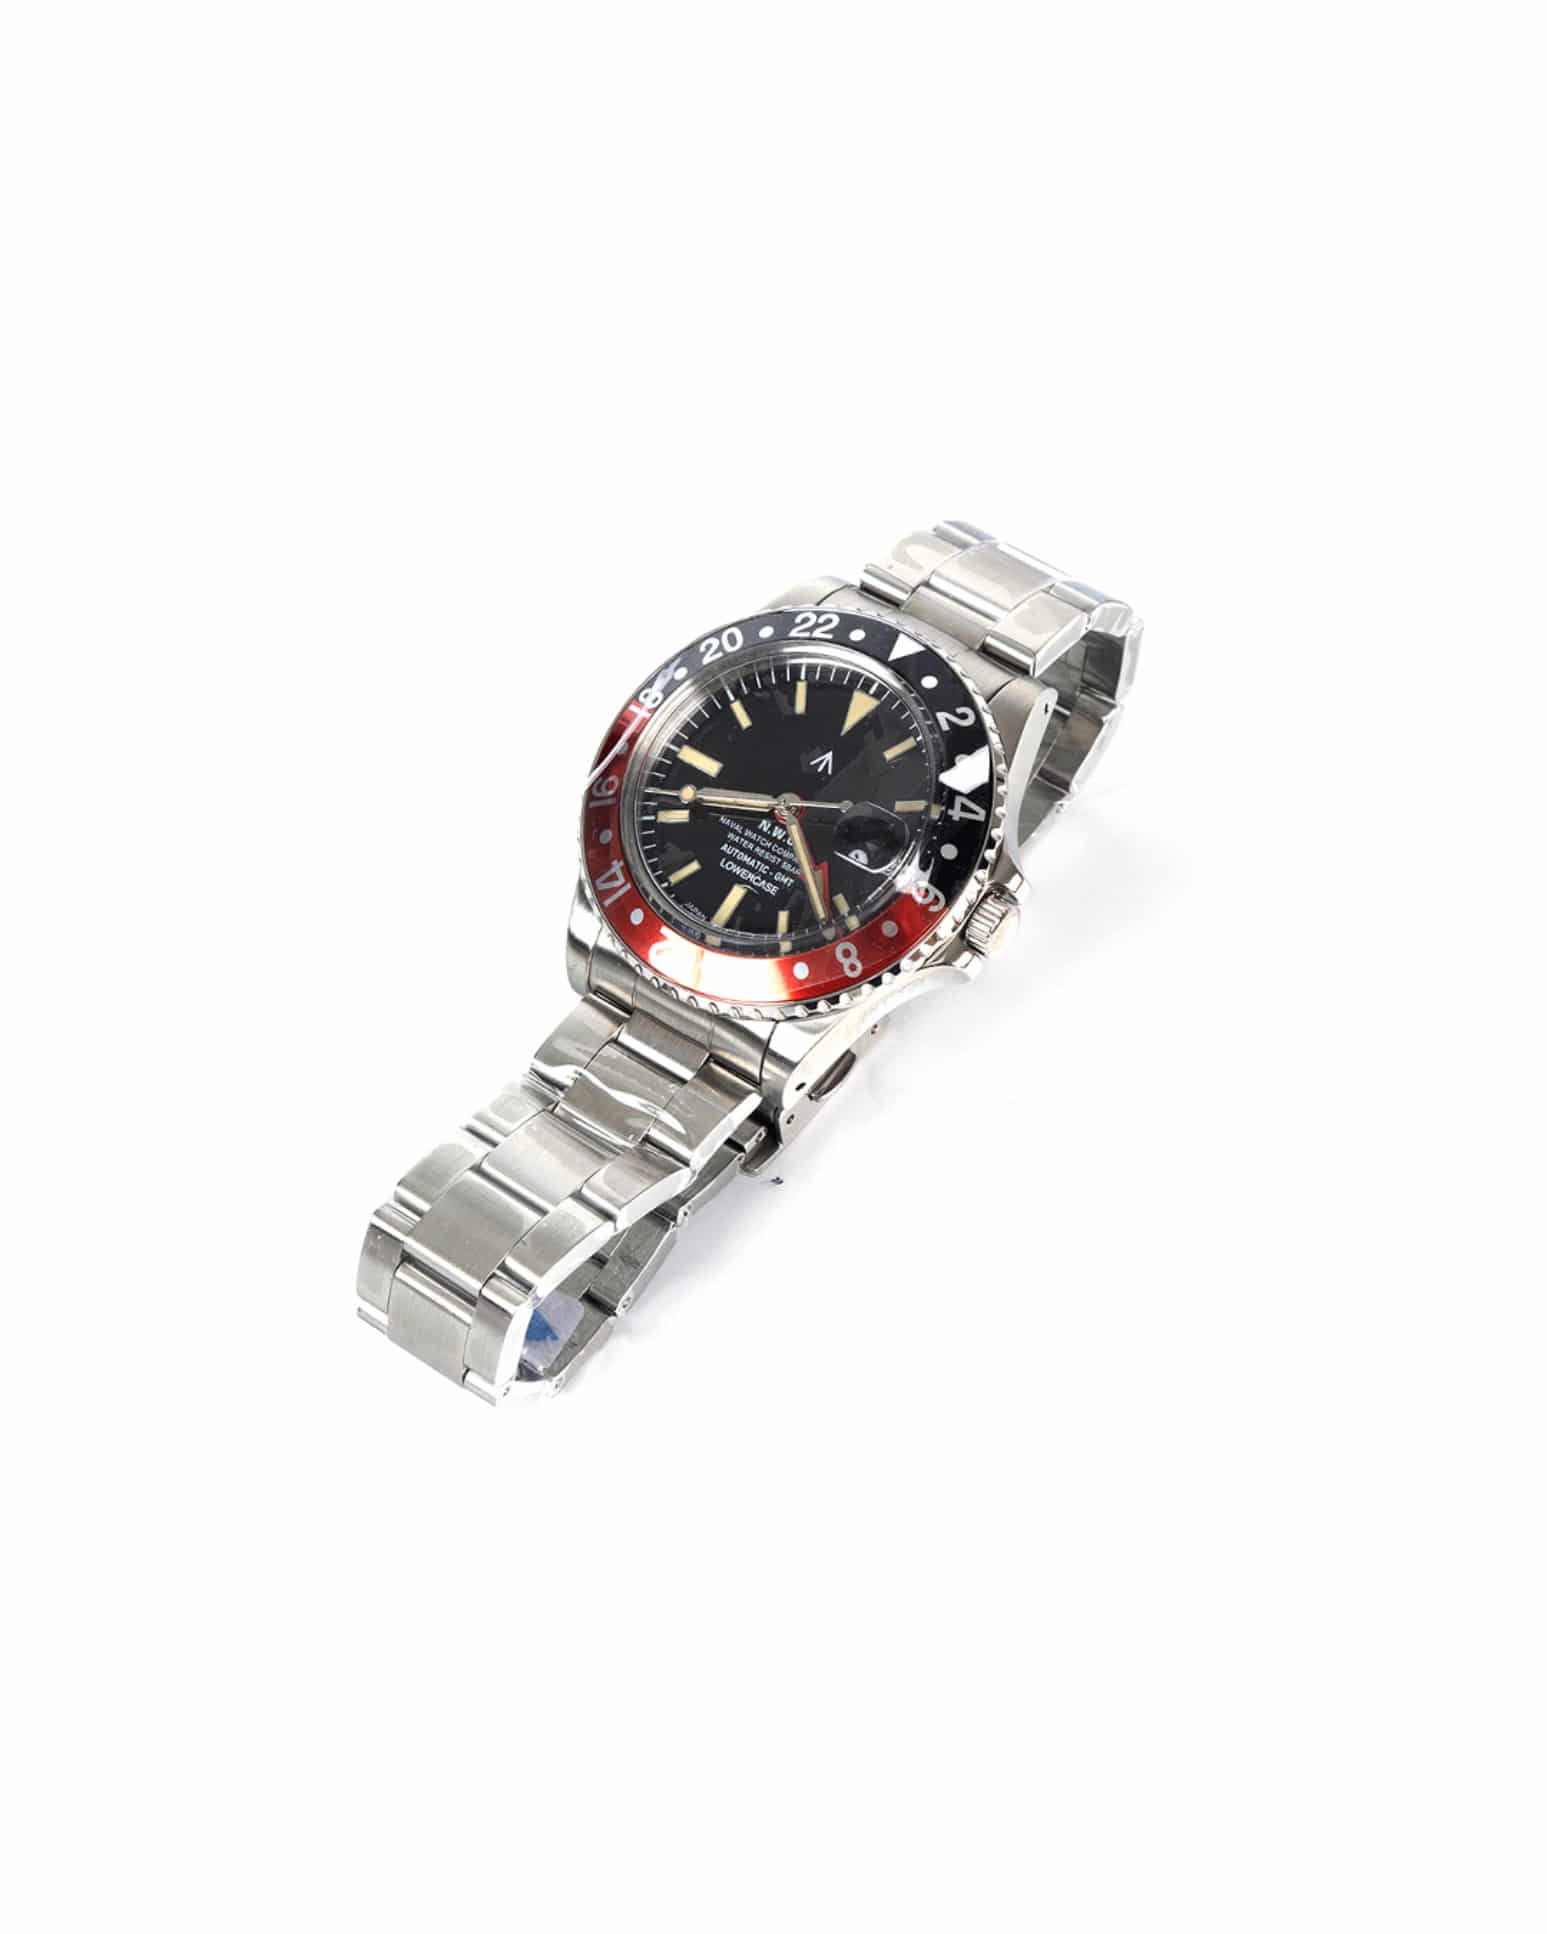 FRXD004 GMT Mechanical S/S 3 Links Metal Band (Black)